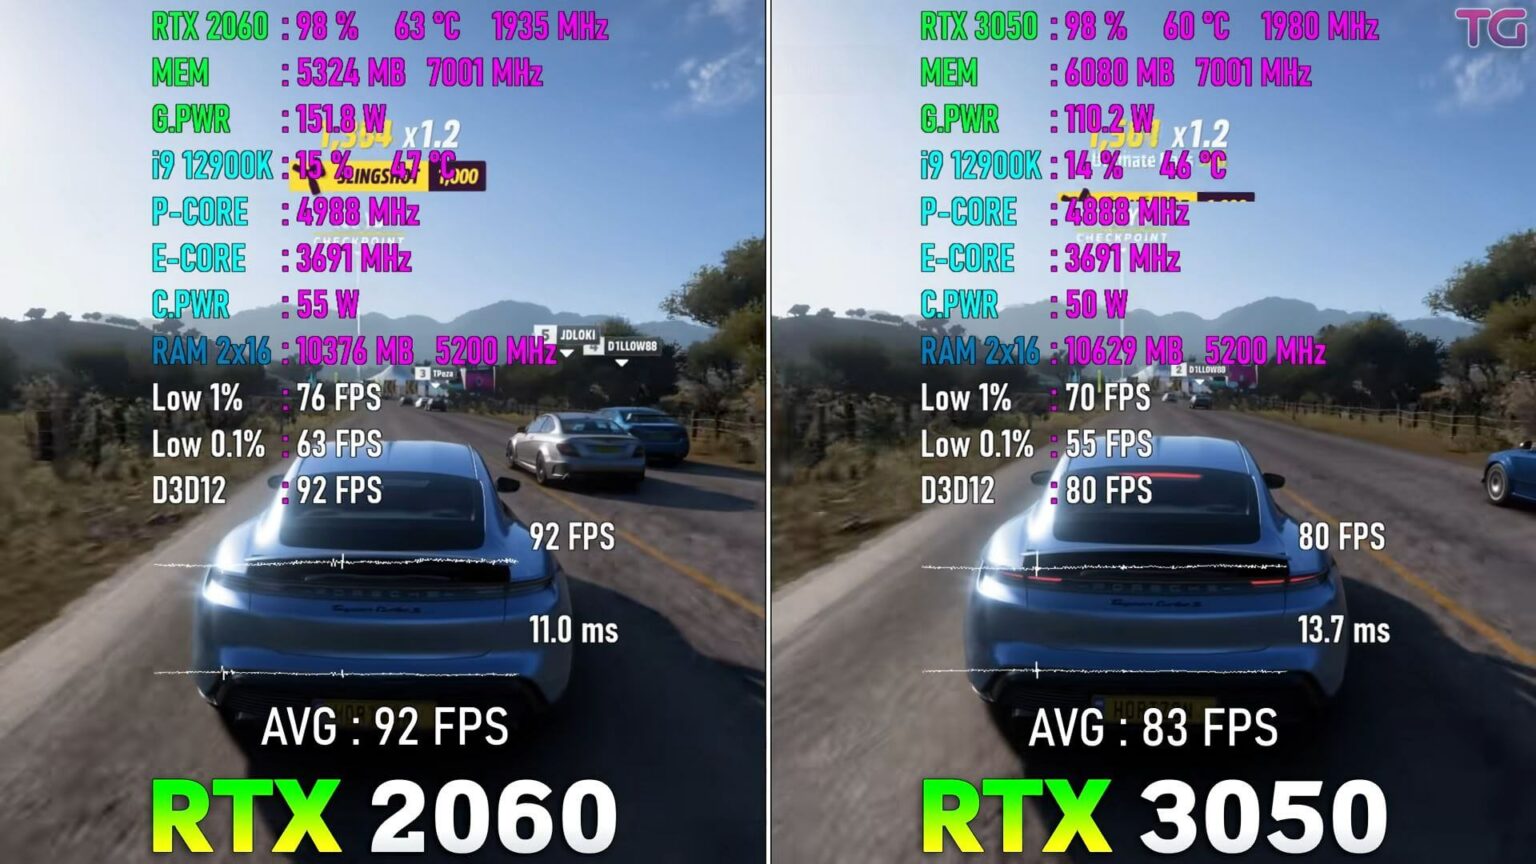 RTX 3050 Vs 2060: Does Cheaper Equate Better? - Tech4Gamers